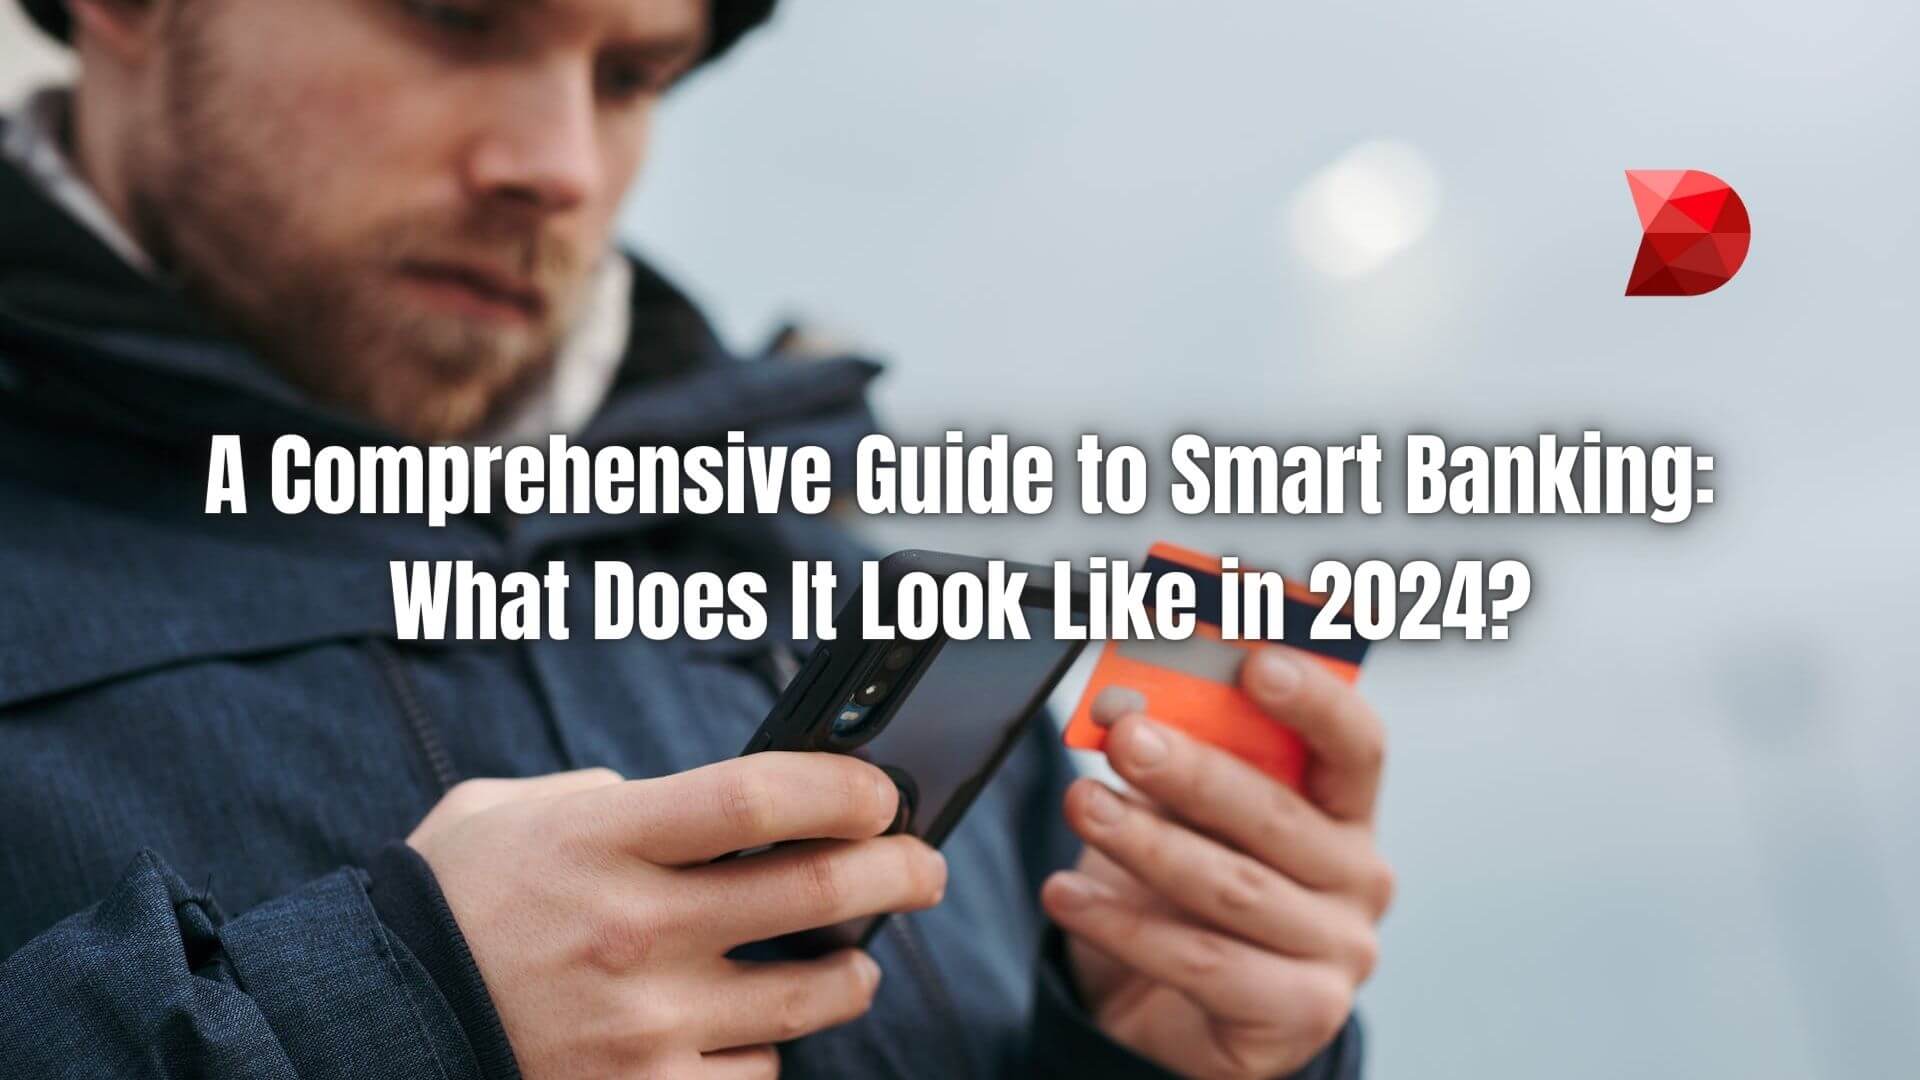 This guide will explore why you should consider looking into smart banking in 2024, and what features users can expect. Learn more!